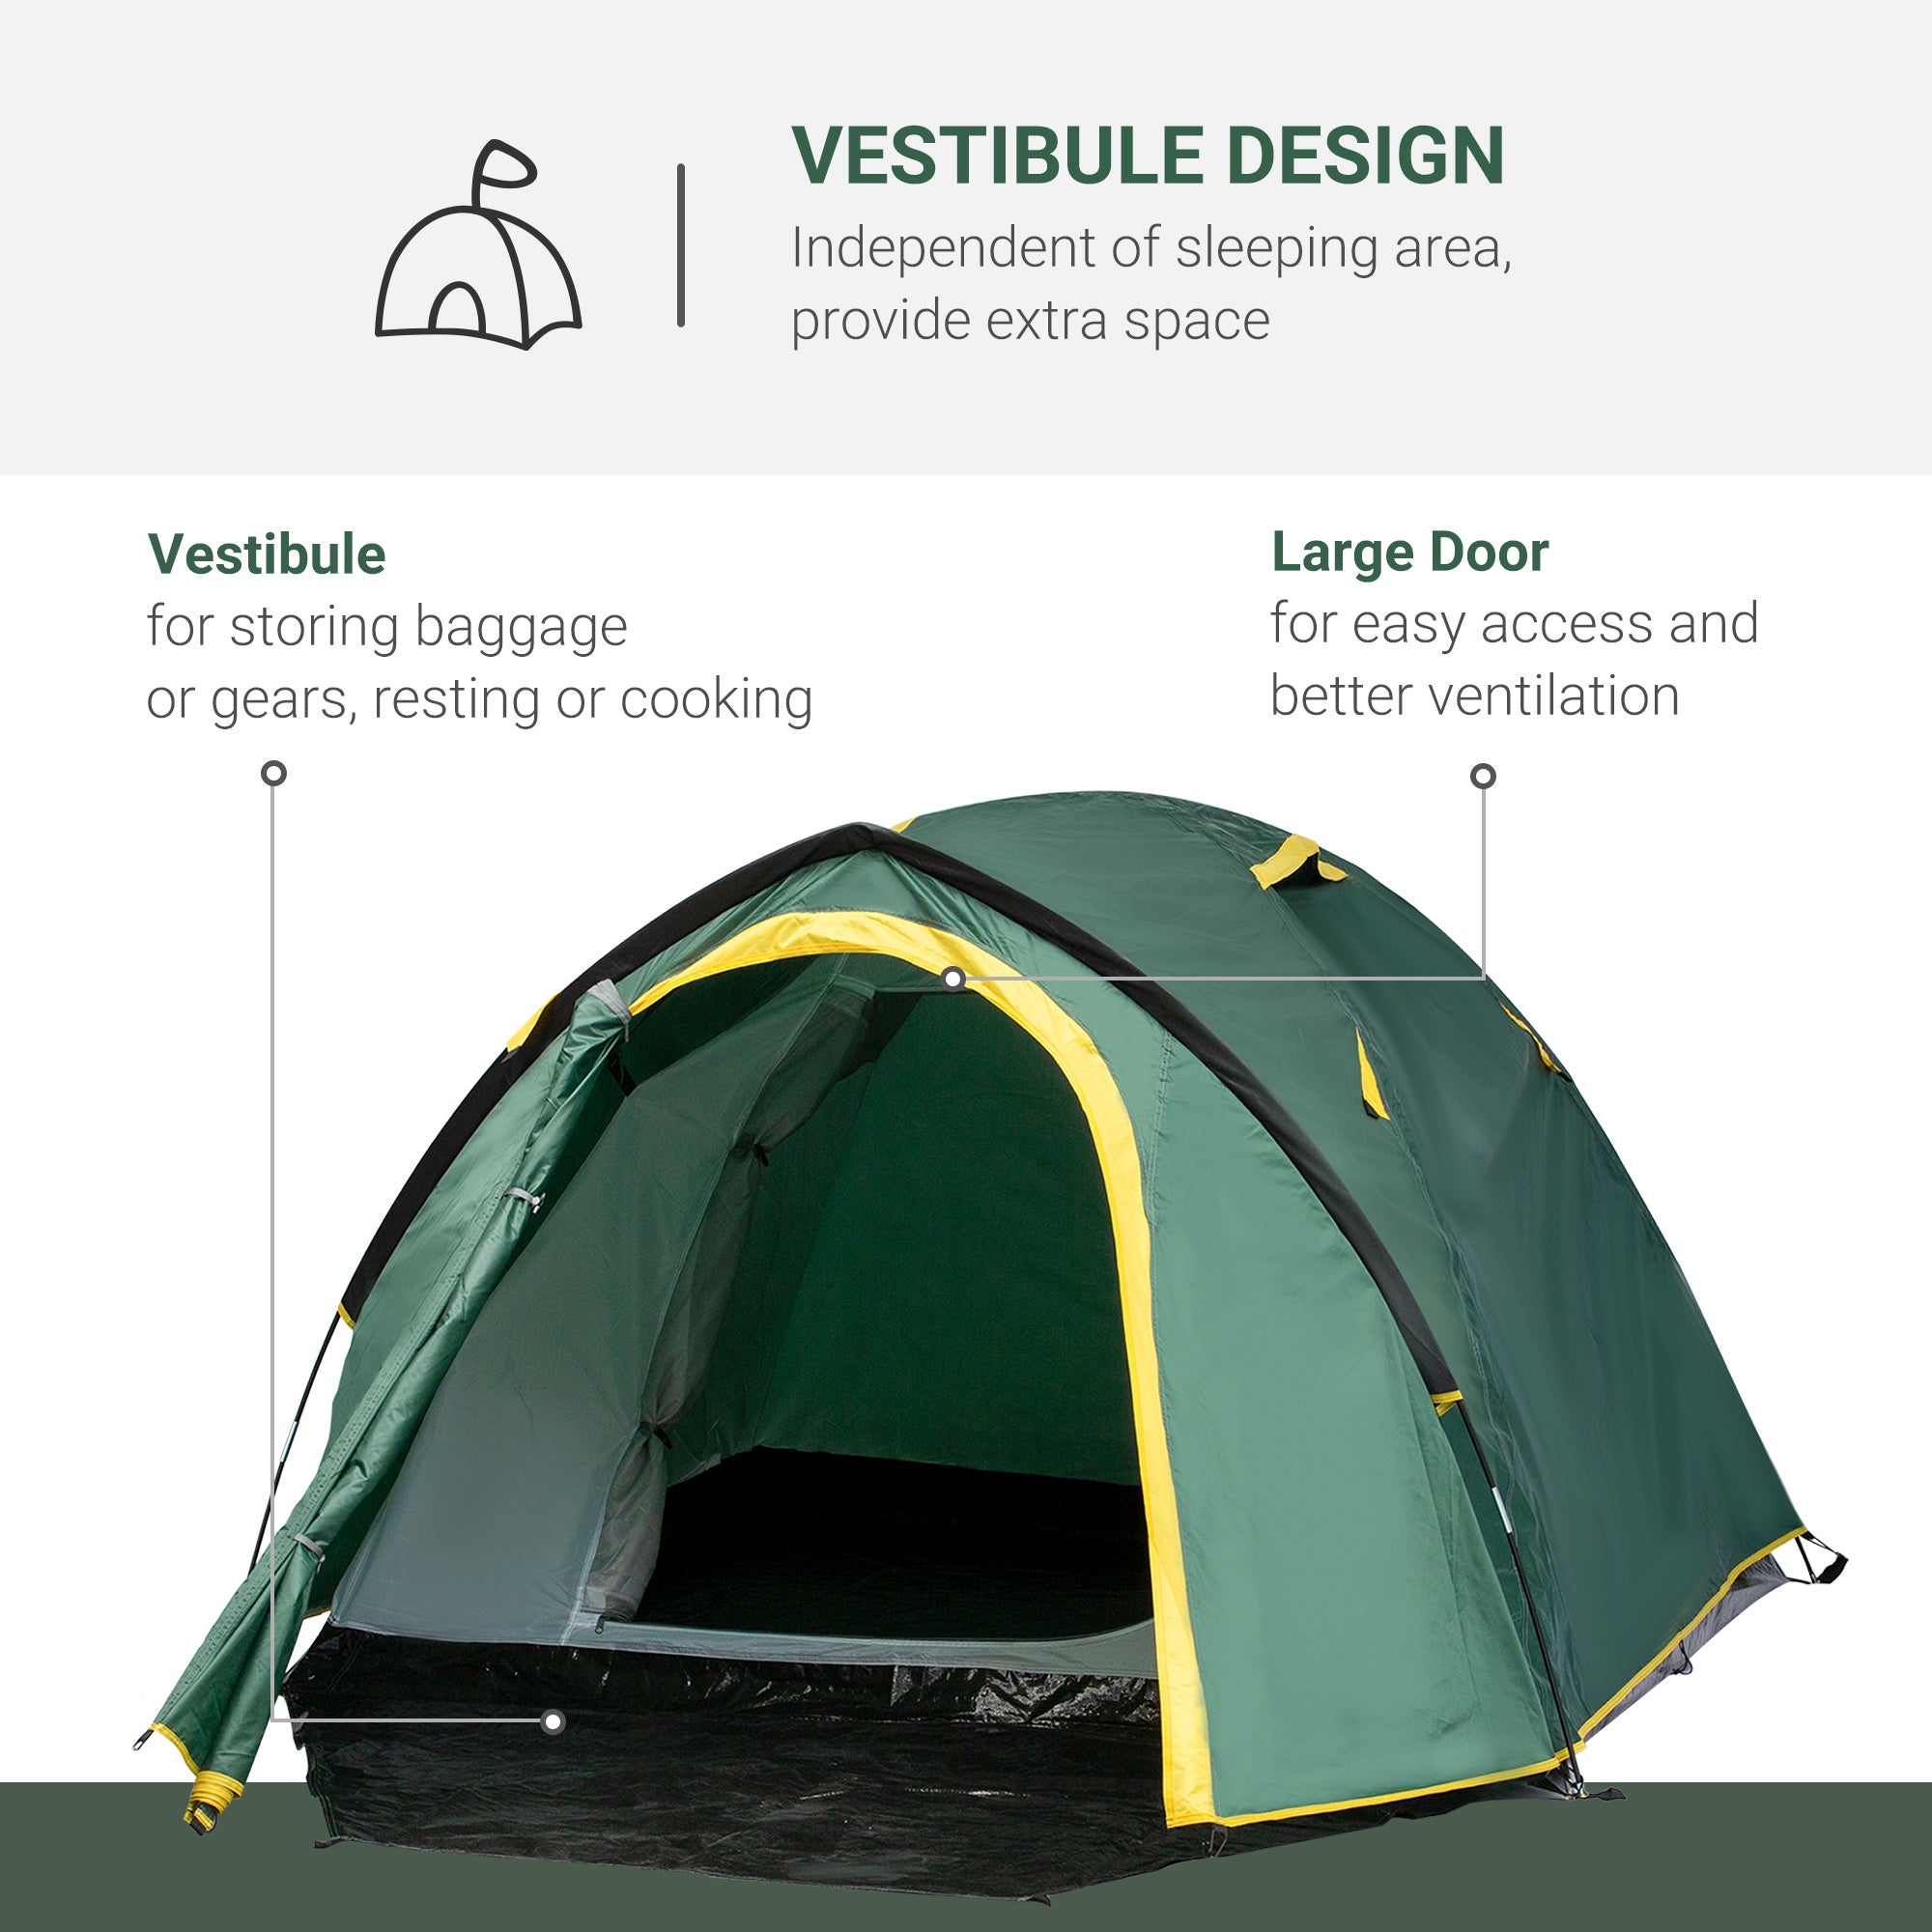 3-Person Camping Tent Backpacking Tent with Vestibule Area, Water-Fighting Polyester Rain Cover, & Mesh Windows, Yellow